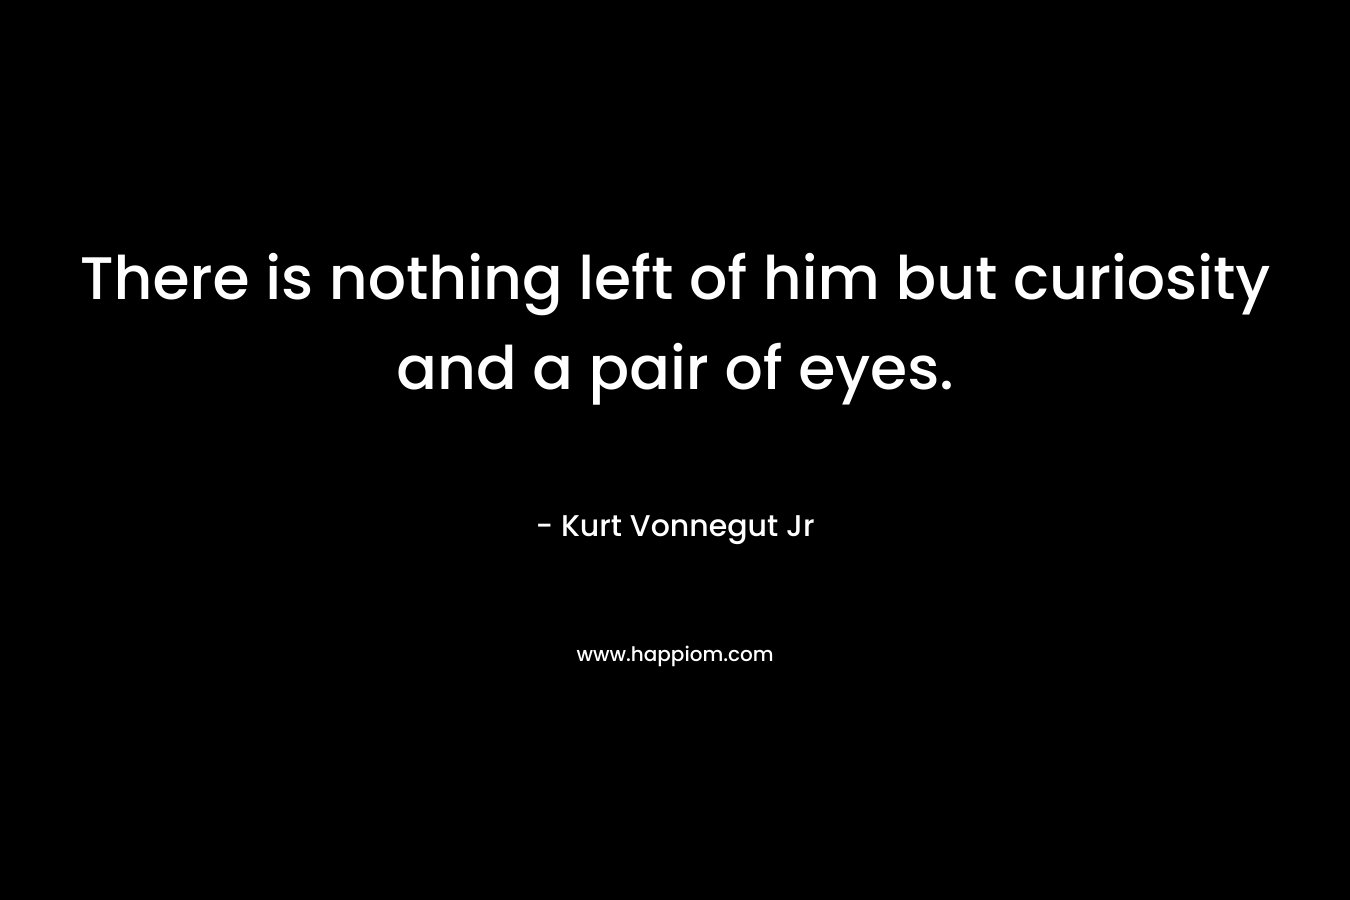 There is nothing left of him but curiosity and a pair of eyes. – Kurt Vonnegut Jr